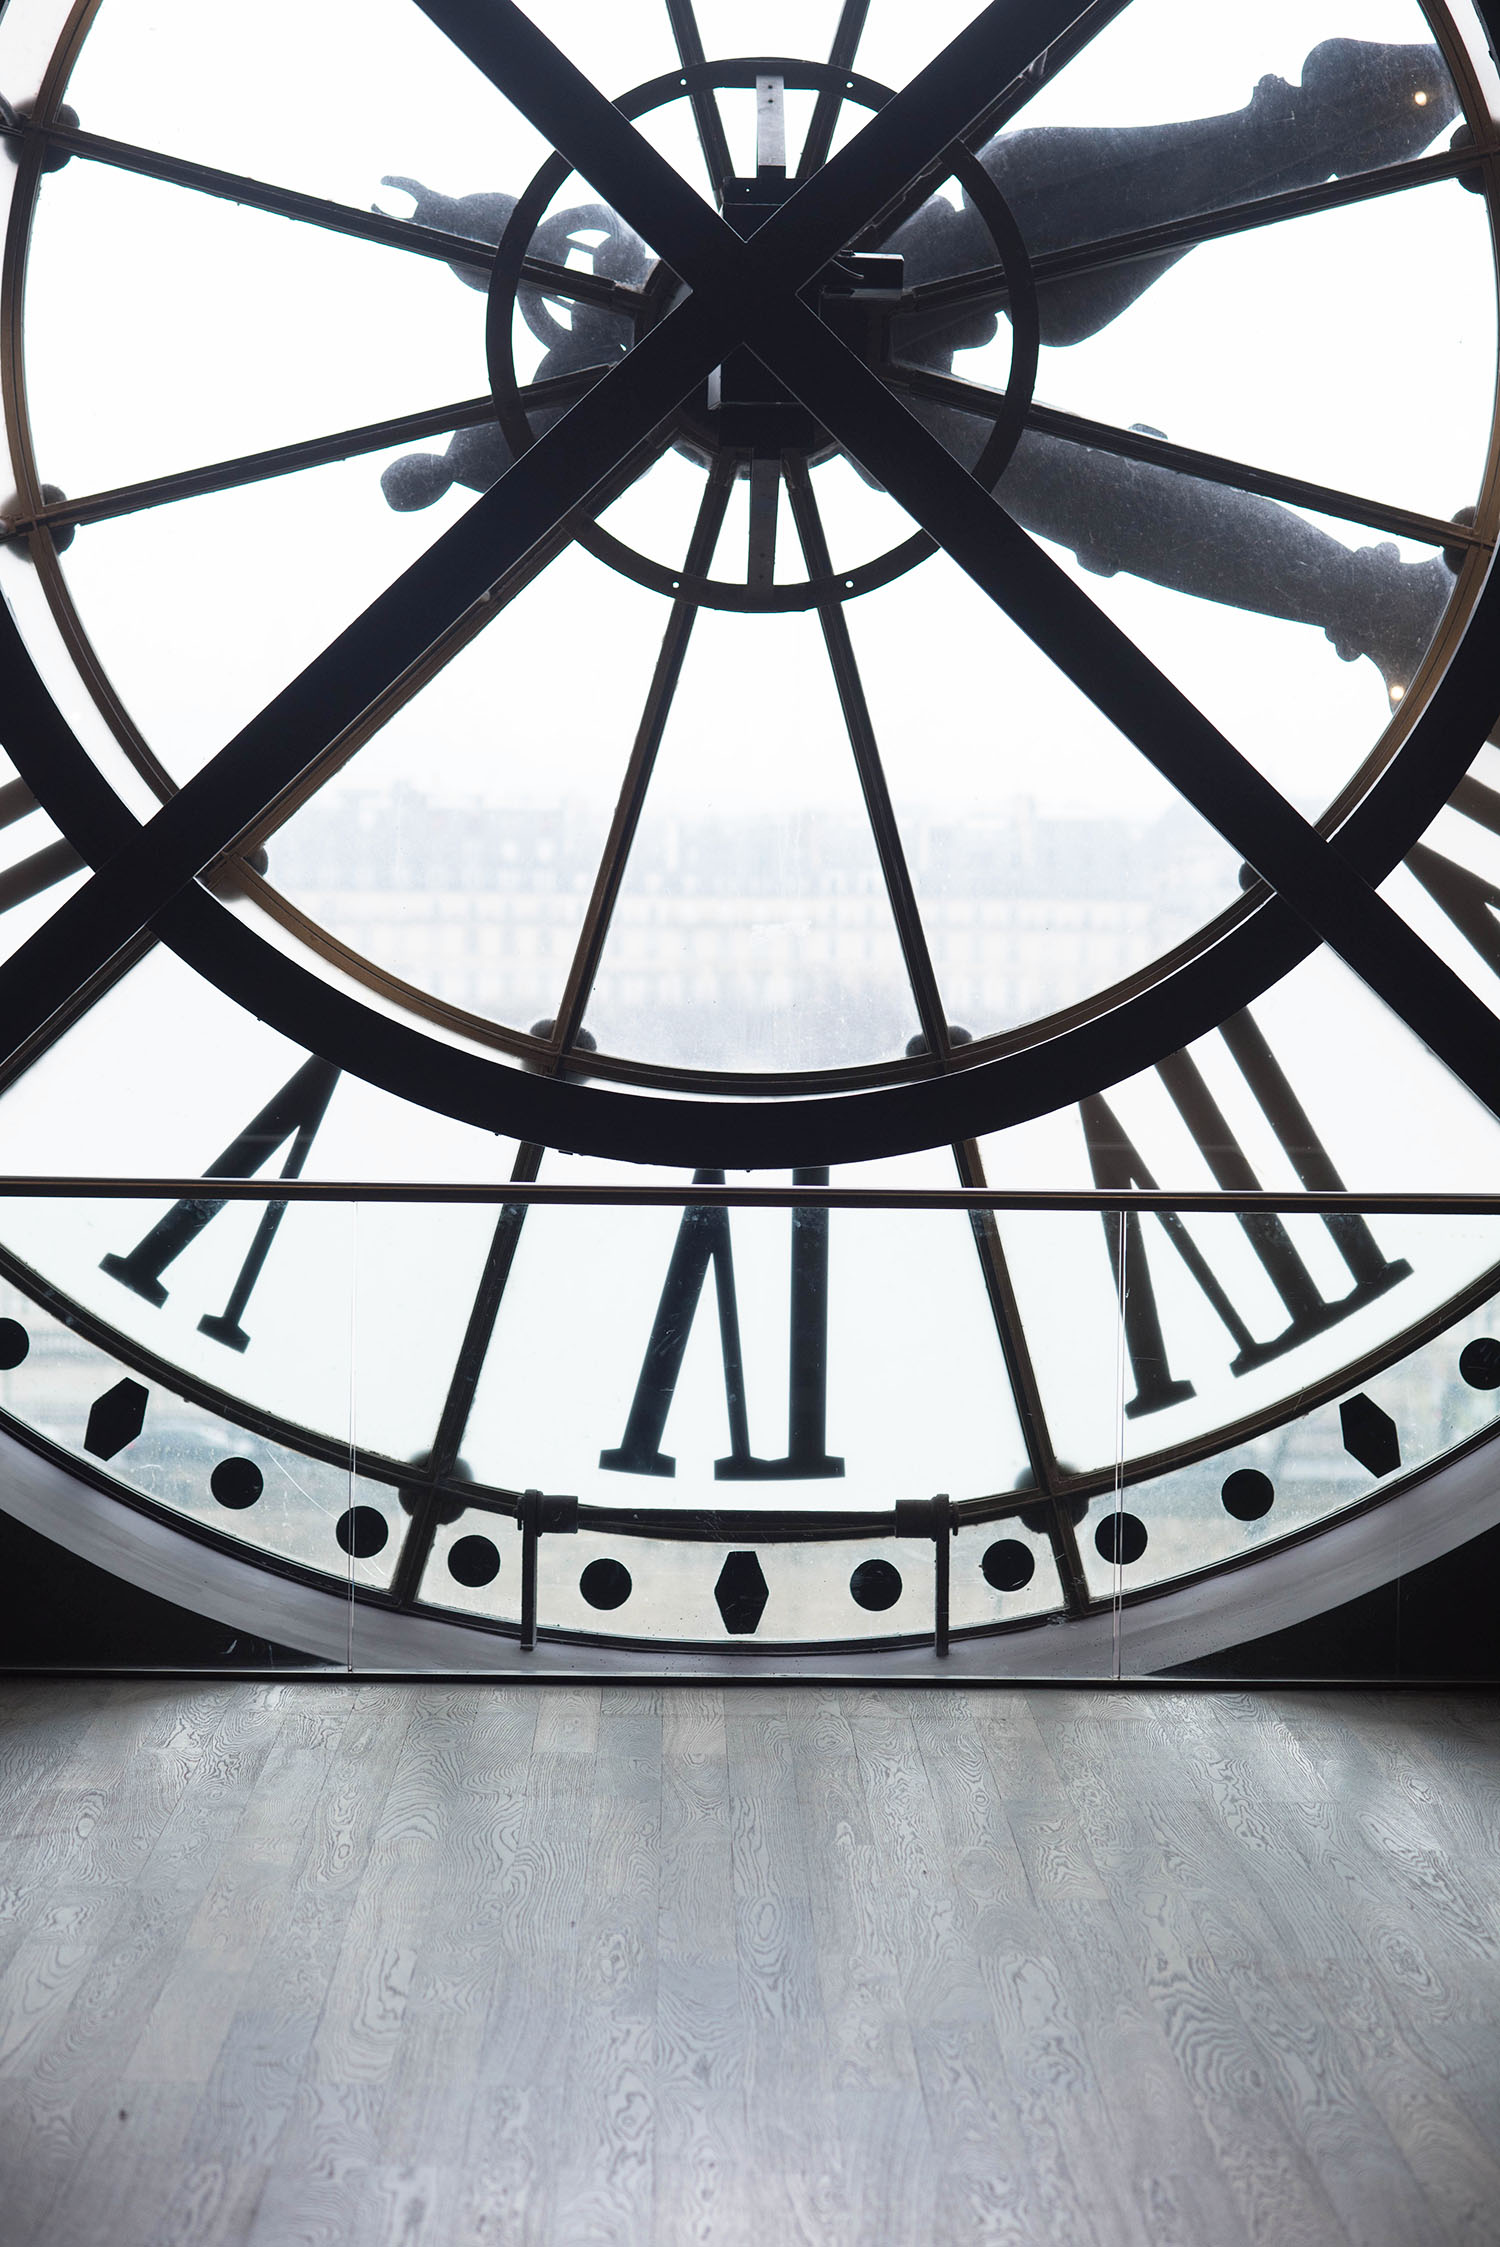 The clock window at the Musee d'Orsay in Paris, as captured by top Winnipeg travel blogger Cee Fardoe of Coco & Vera